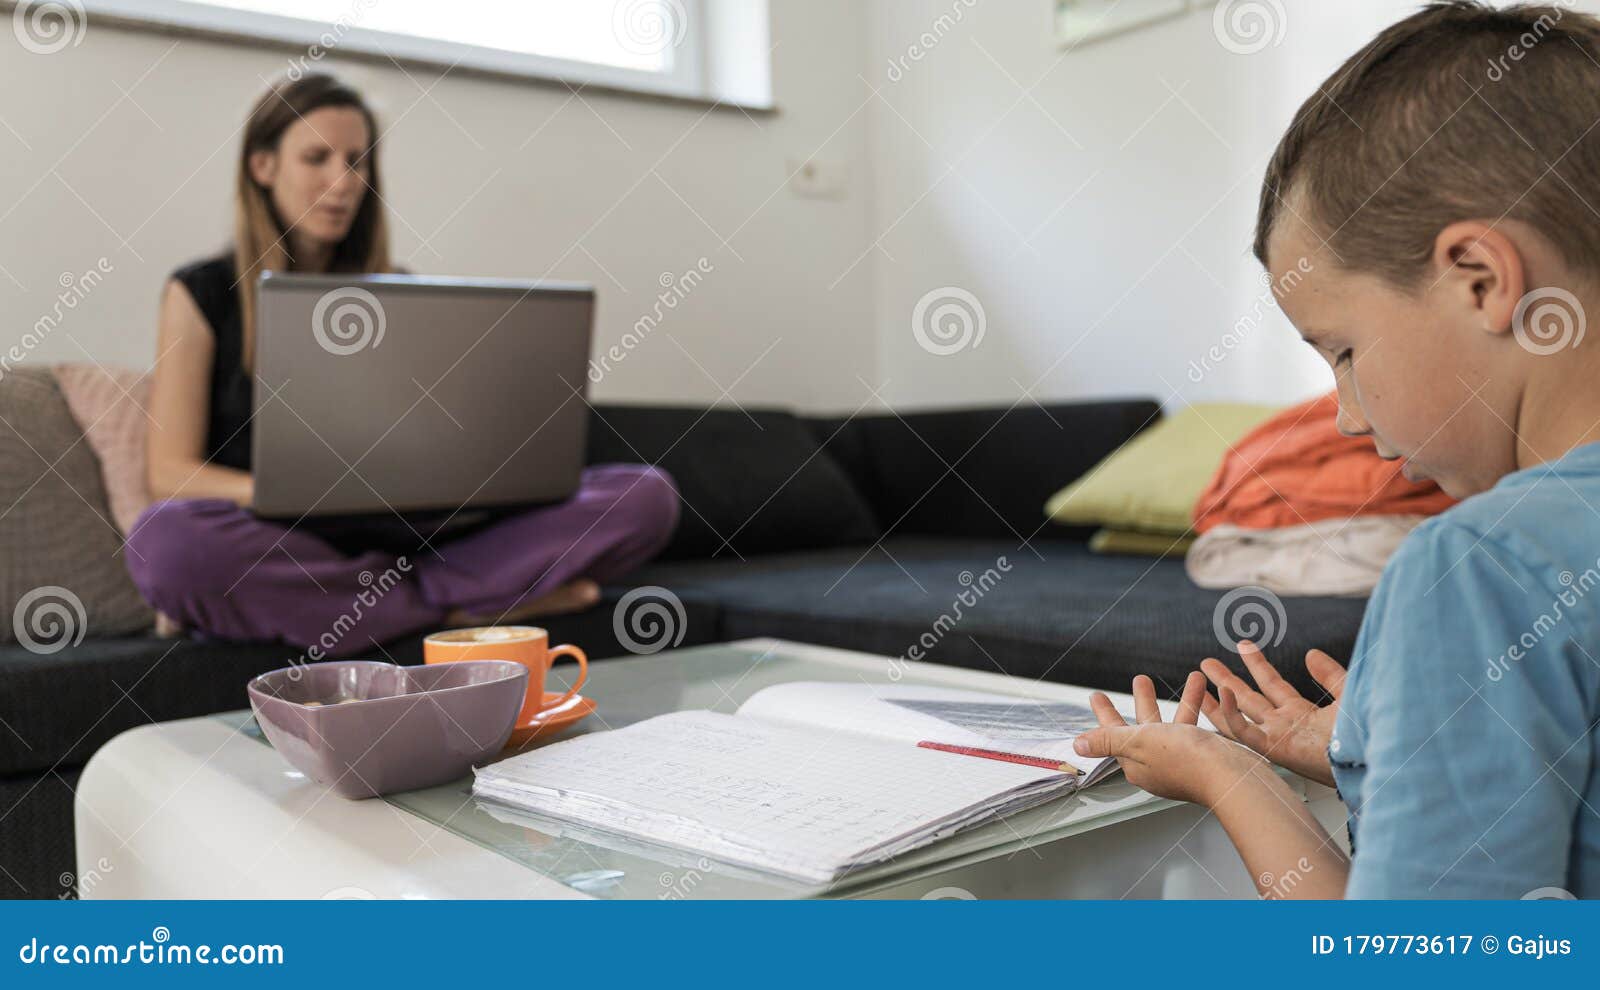 home schooling conceptual image